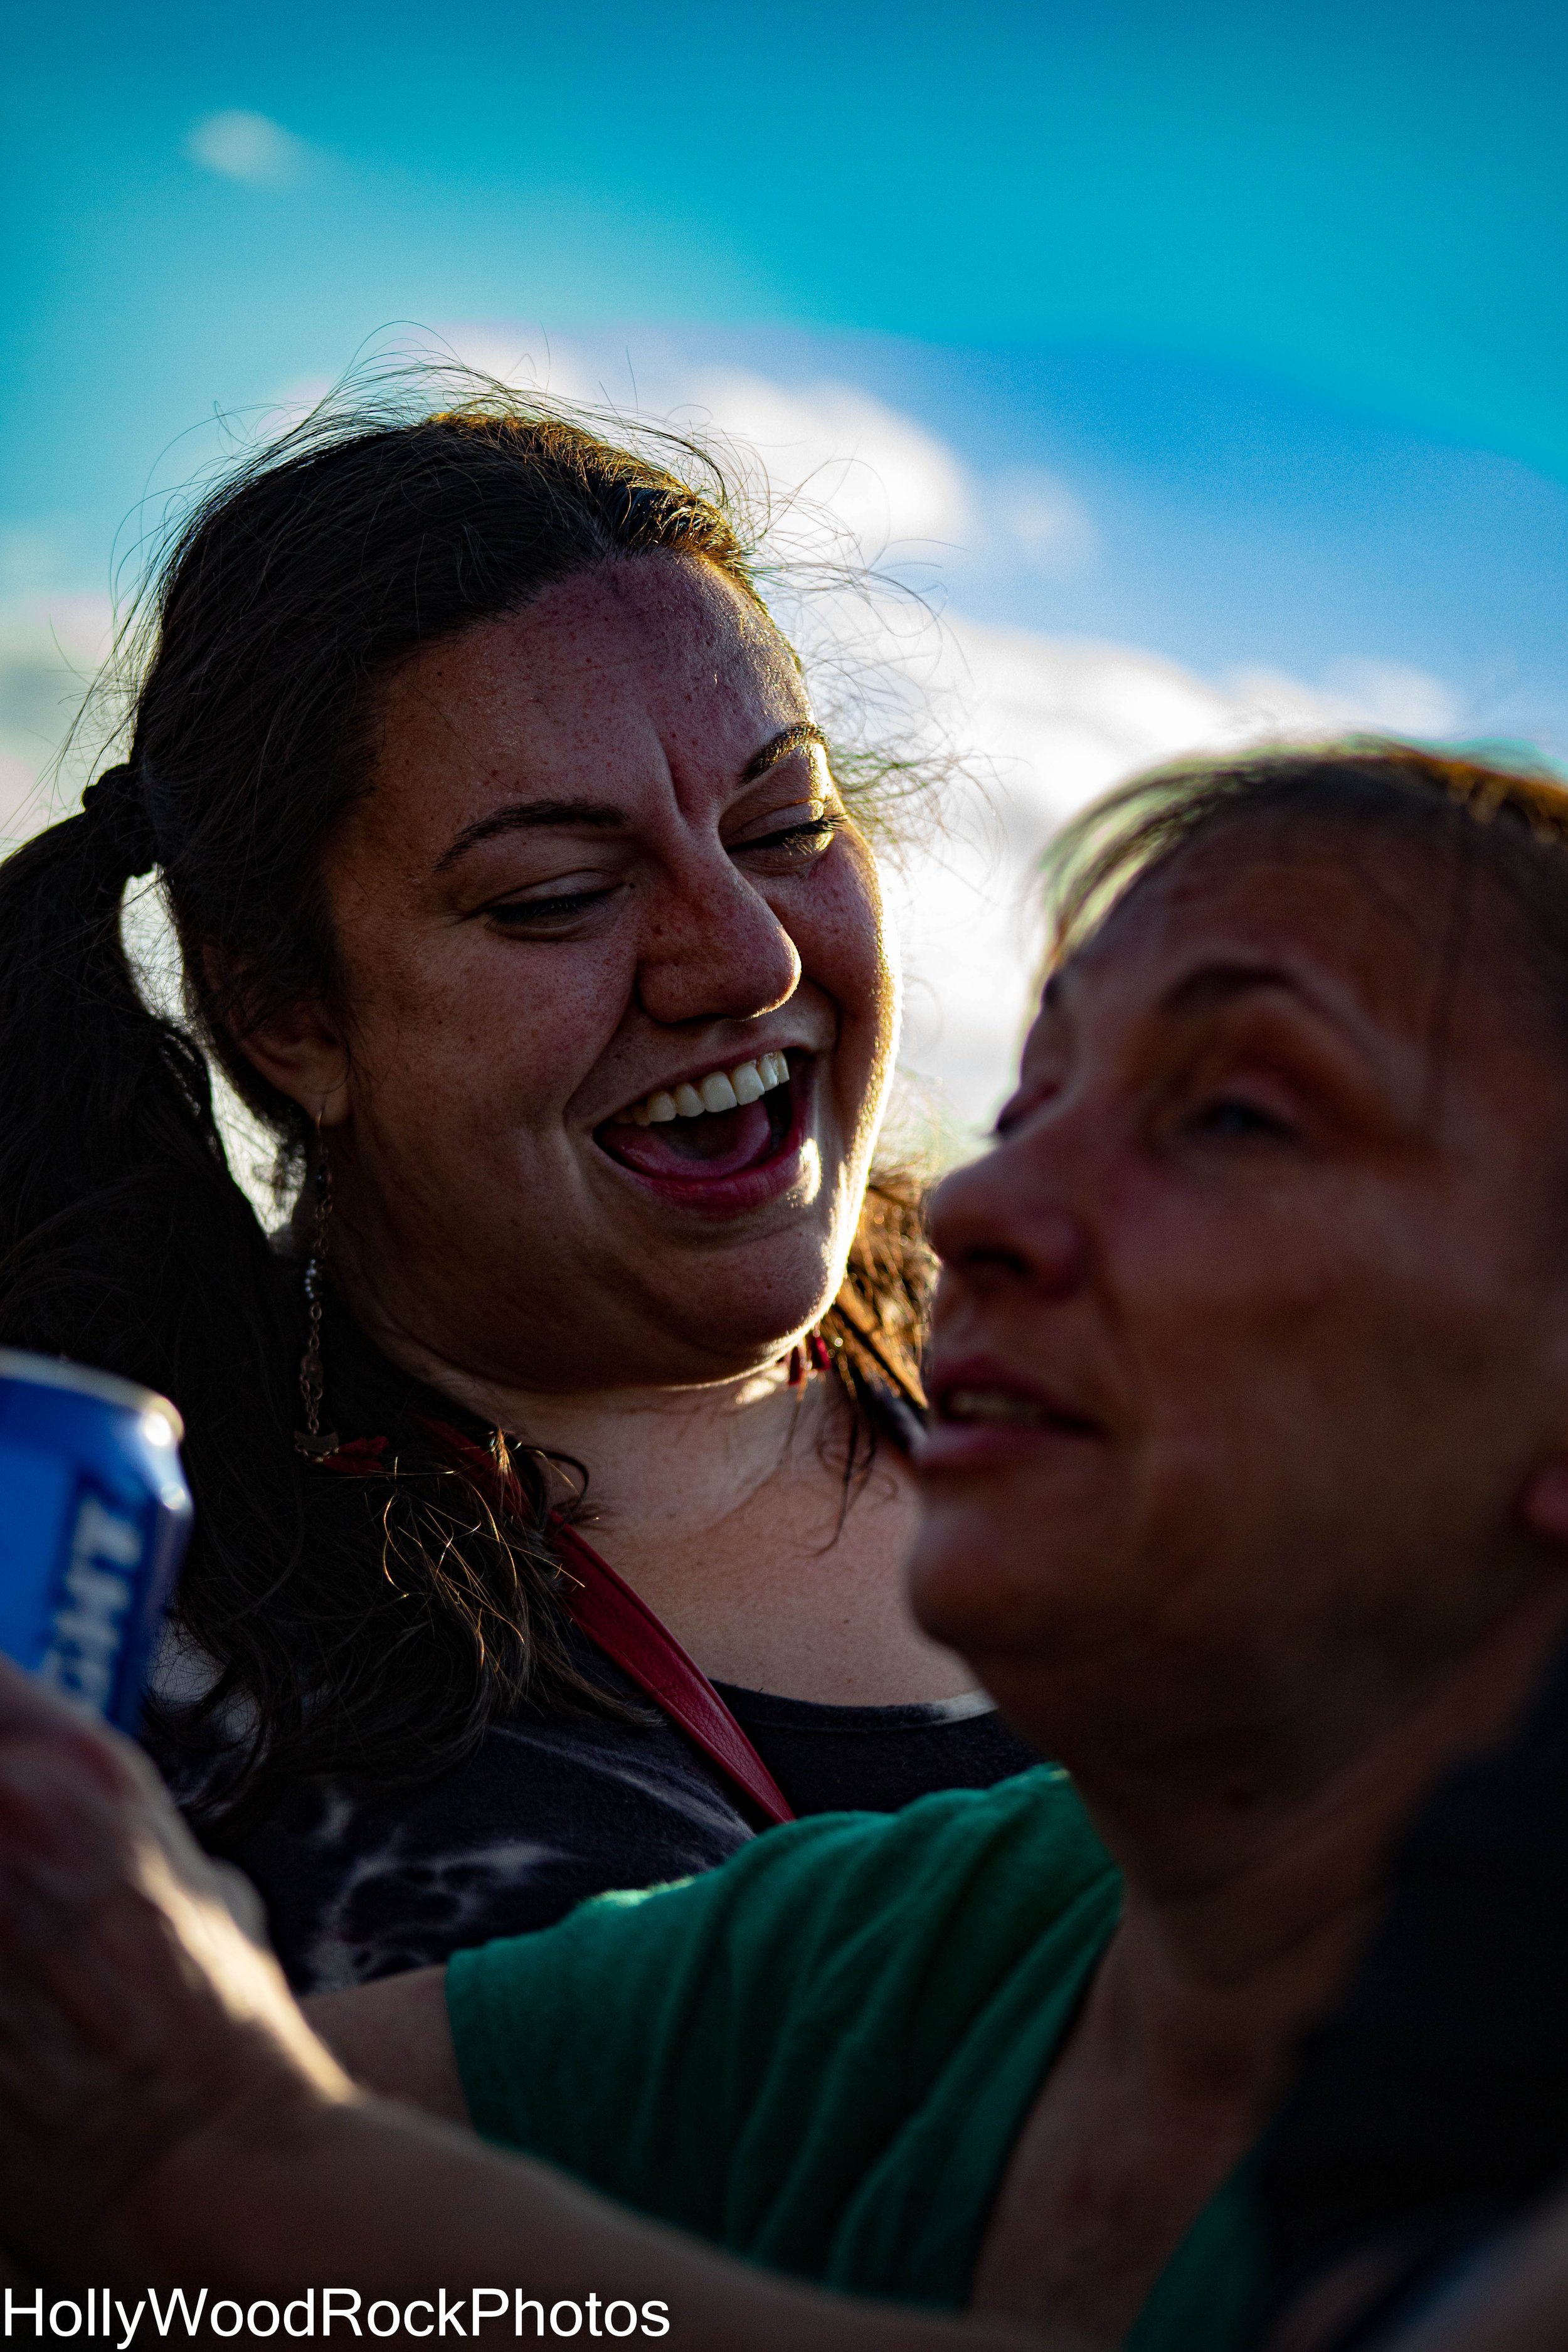 A Fan Smiles at Blue Ridge Rock Festival by Holly Williams